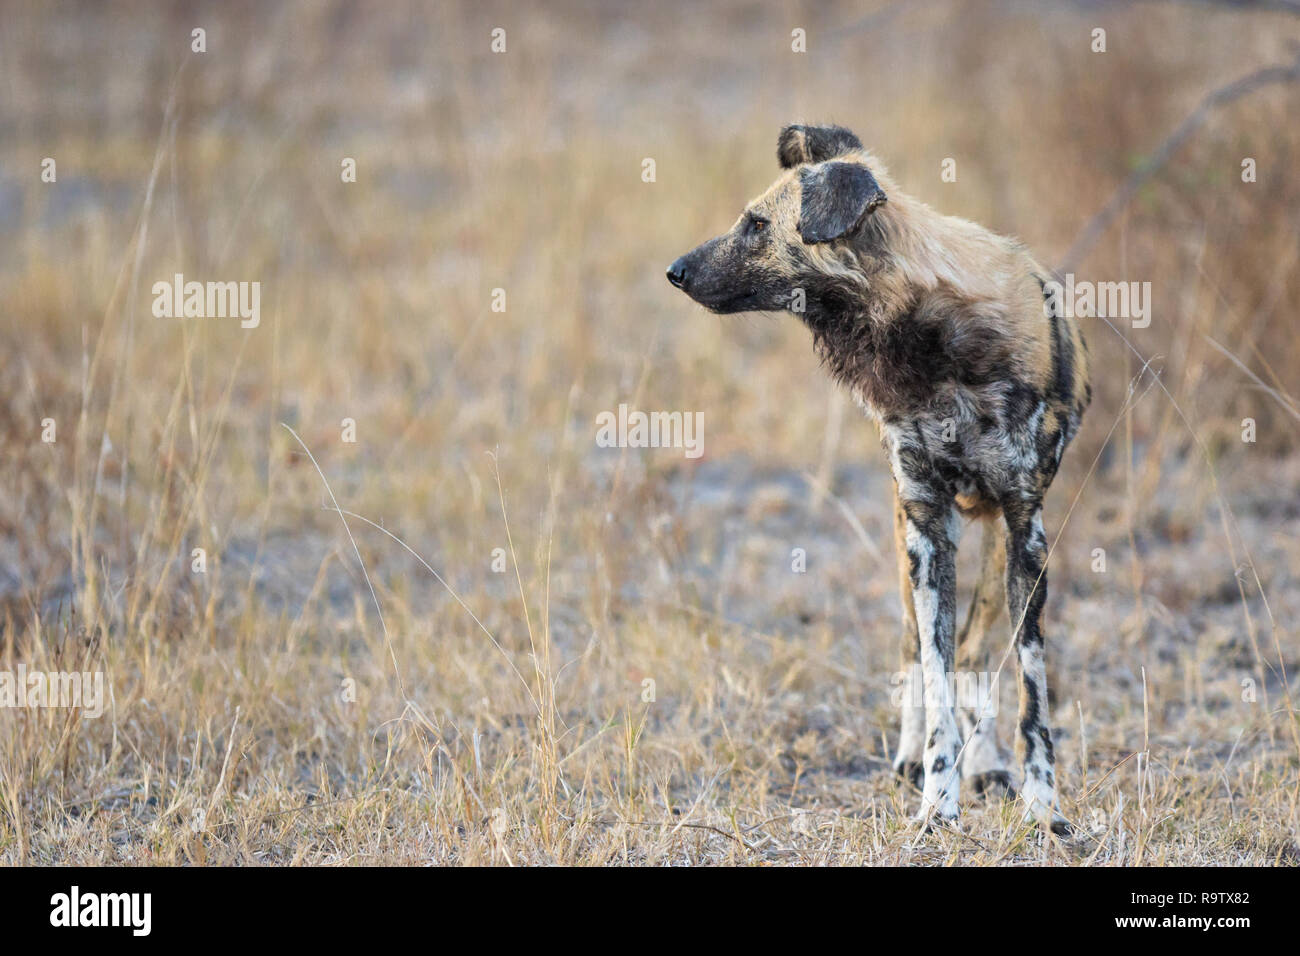 Mature Wild dog searching for prey very early in the morning. Stock Photo